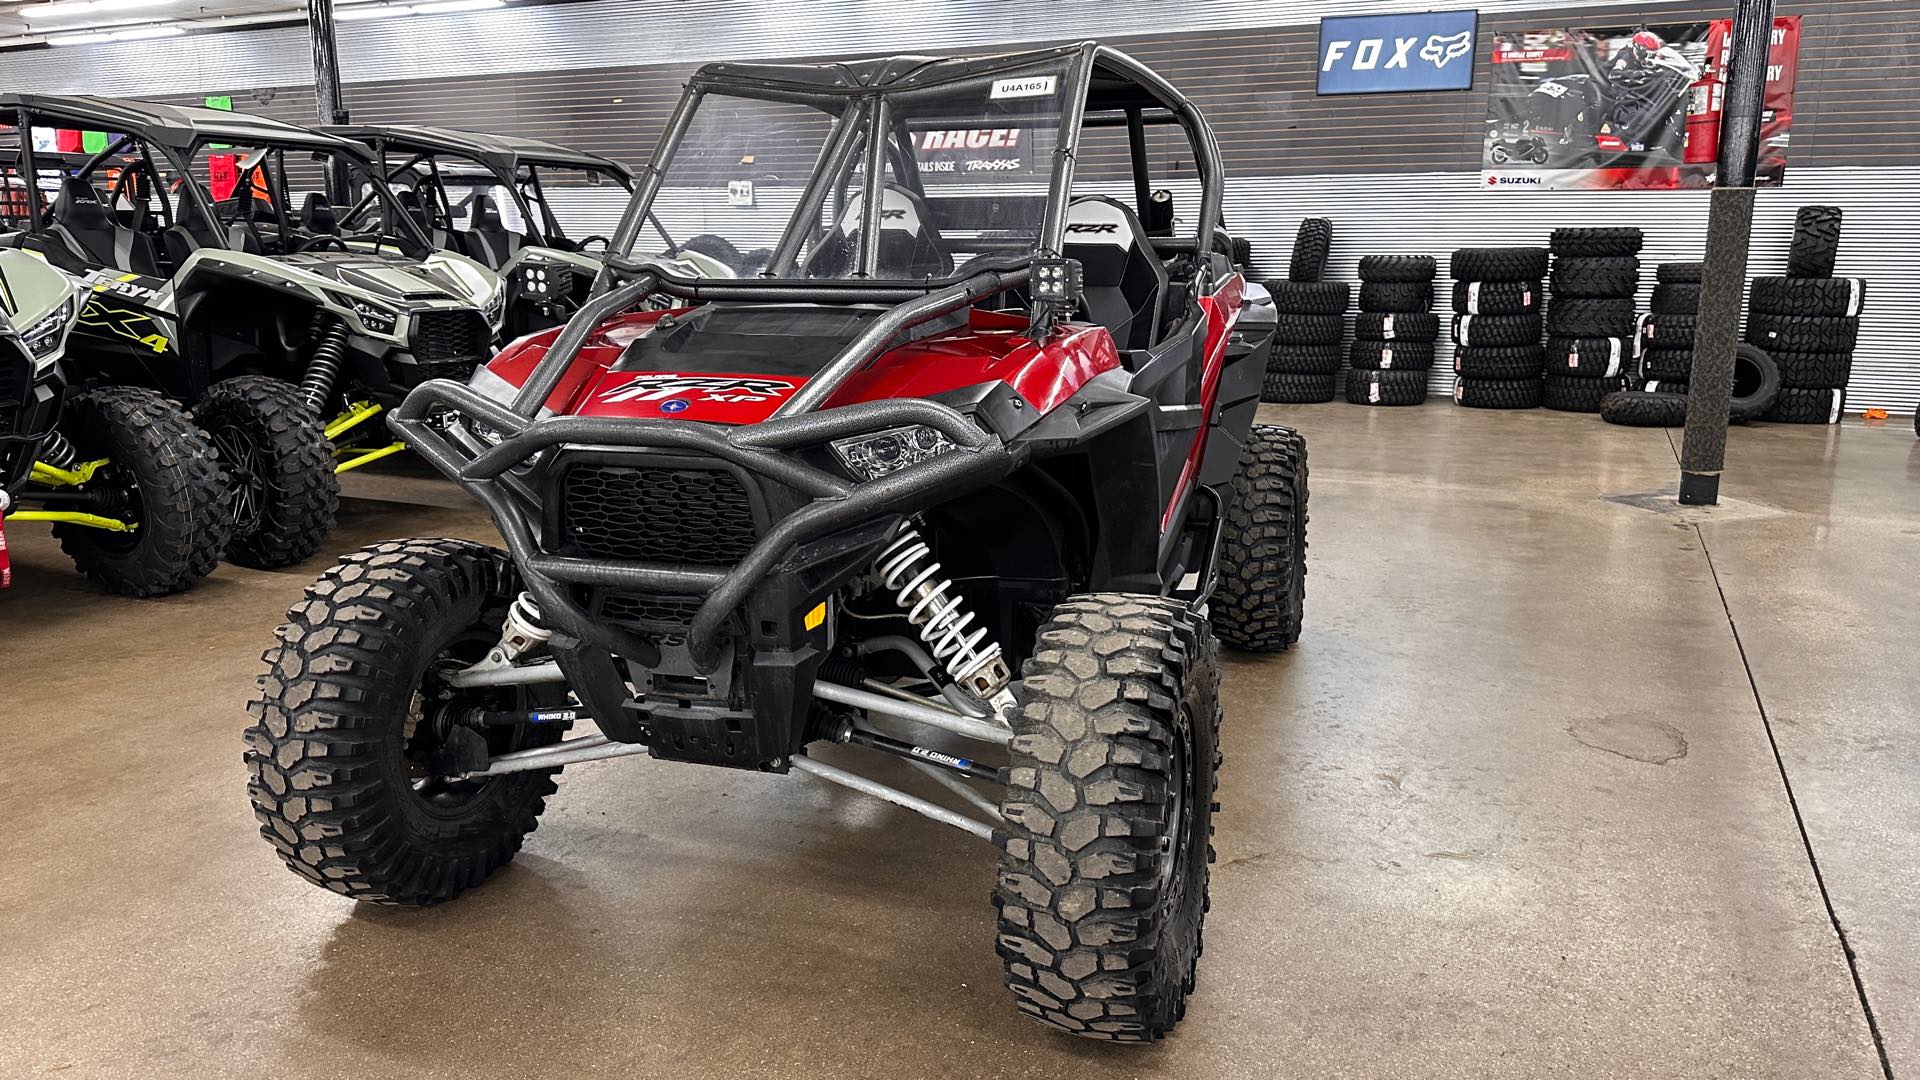 2016 Polaris RZR XP 1000 EPS at ATVs and More